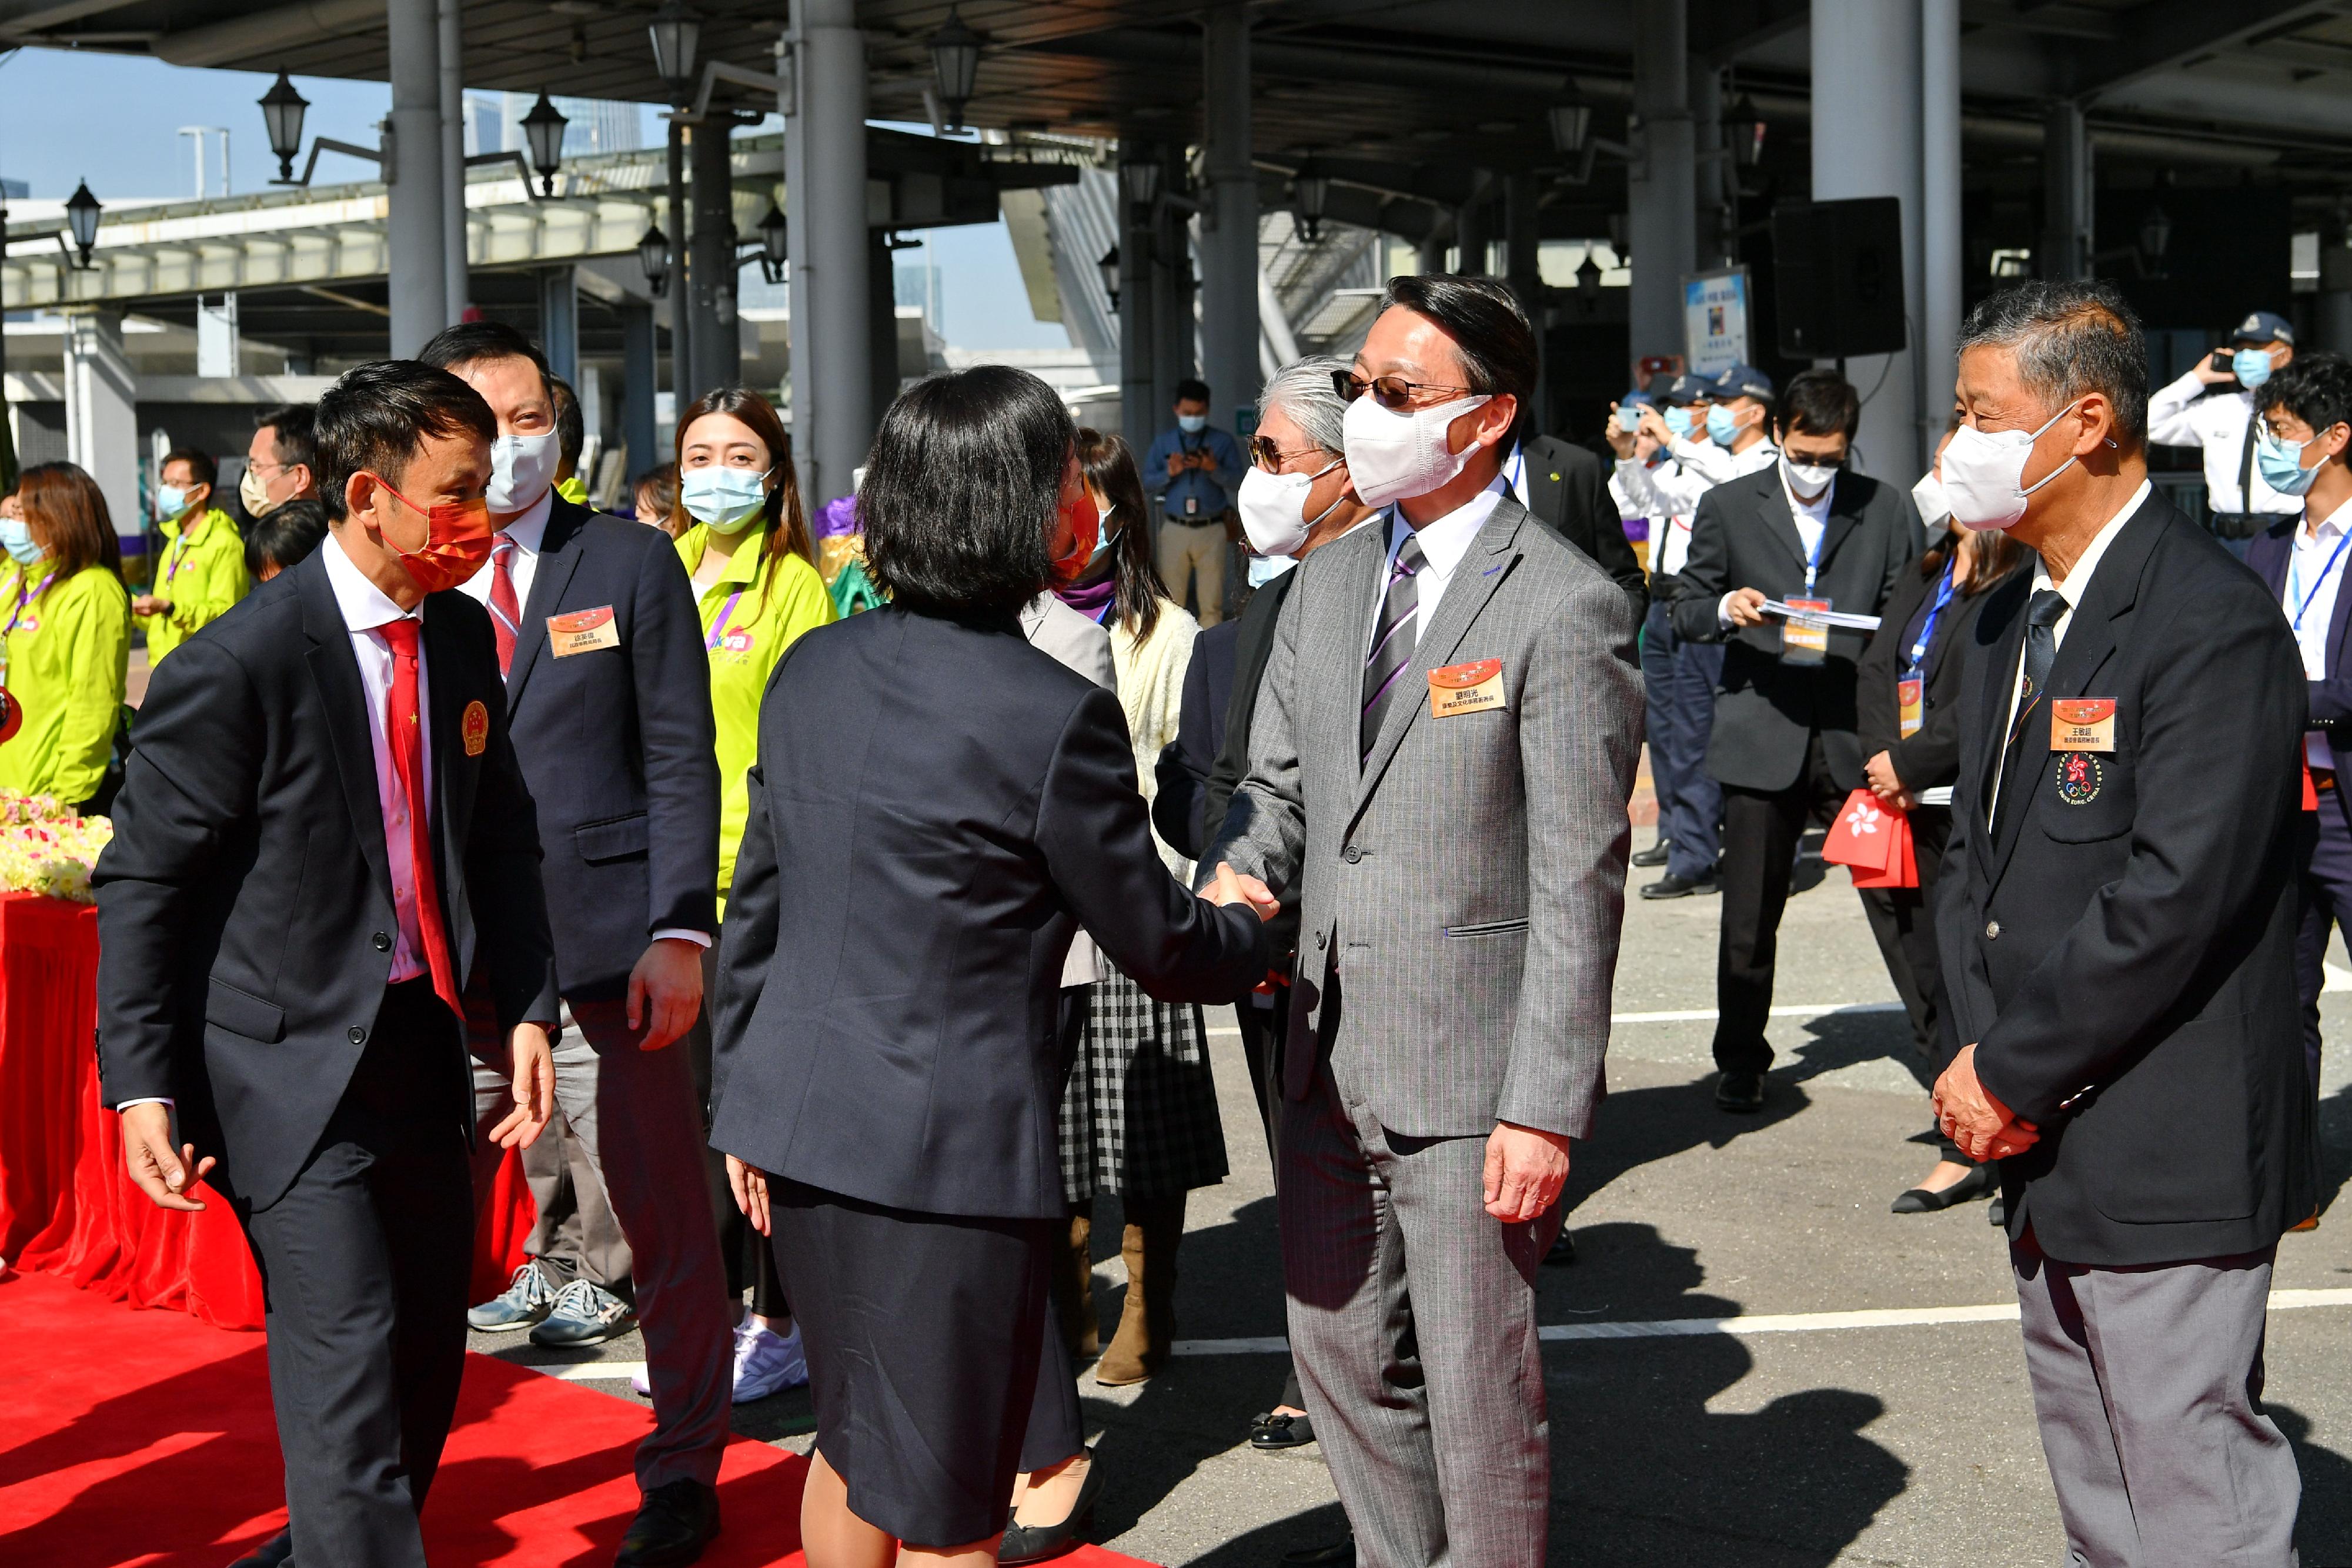 The Tokyo 2020 Olympic Games Mainland Olympians delegation arrives in Hong Kong today (December 3) for a three-day visit. Photo shows the Director of Leisure and Cultural Services, Mr Vincent Liu (front, second right), greeting the delegation at the Shenzhen Bay Port.